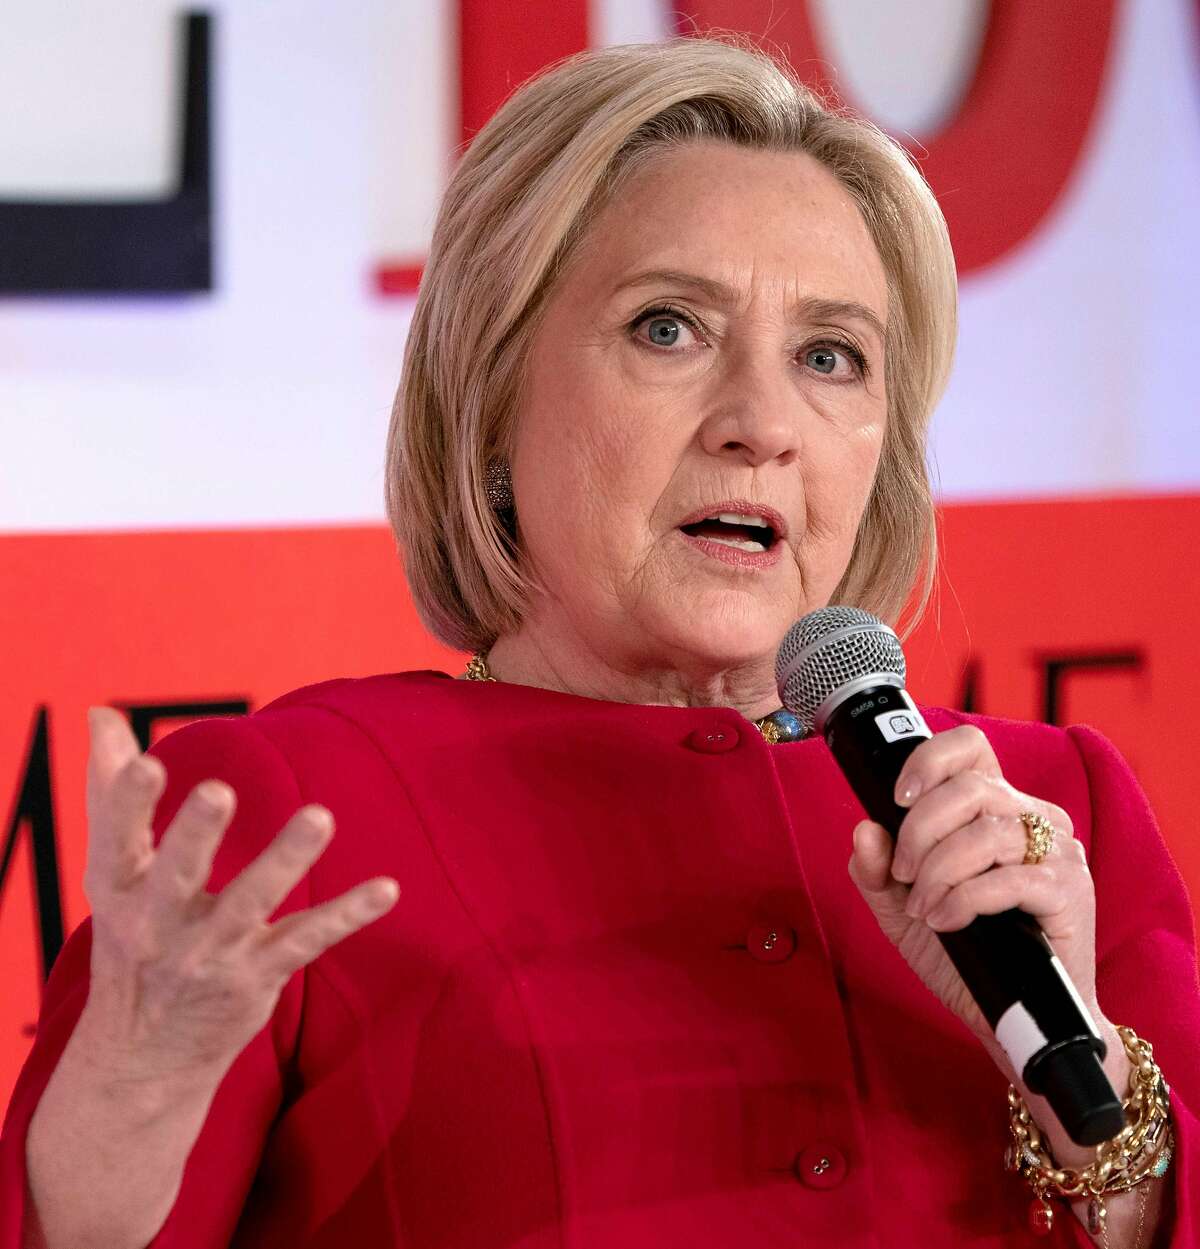 FILE - In this file photo taken on April 23, 2019, former US Secretary of State Hillary Clinton speaks during the Time 100 Summit event on in New York. - Hillary Clinton has warned that Russia, which interfered in the US election she lost in 2016, is "grooming" a Democratic candidate for a third-party run next year, signalling congresswoman Tulsi Gabbard could fill the role. The goal of this would essentially be to divide the US electorate and help President Donald Trump win re-election, Clinton said. "I'm not making any predictions but I think they've got their eye on somebody who's currently in the Democratic primary, and they're grooming her to be the third-party candidate," the former secretary of state told David Plouffe in his "Campaign HQ" podcast.